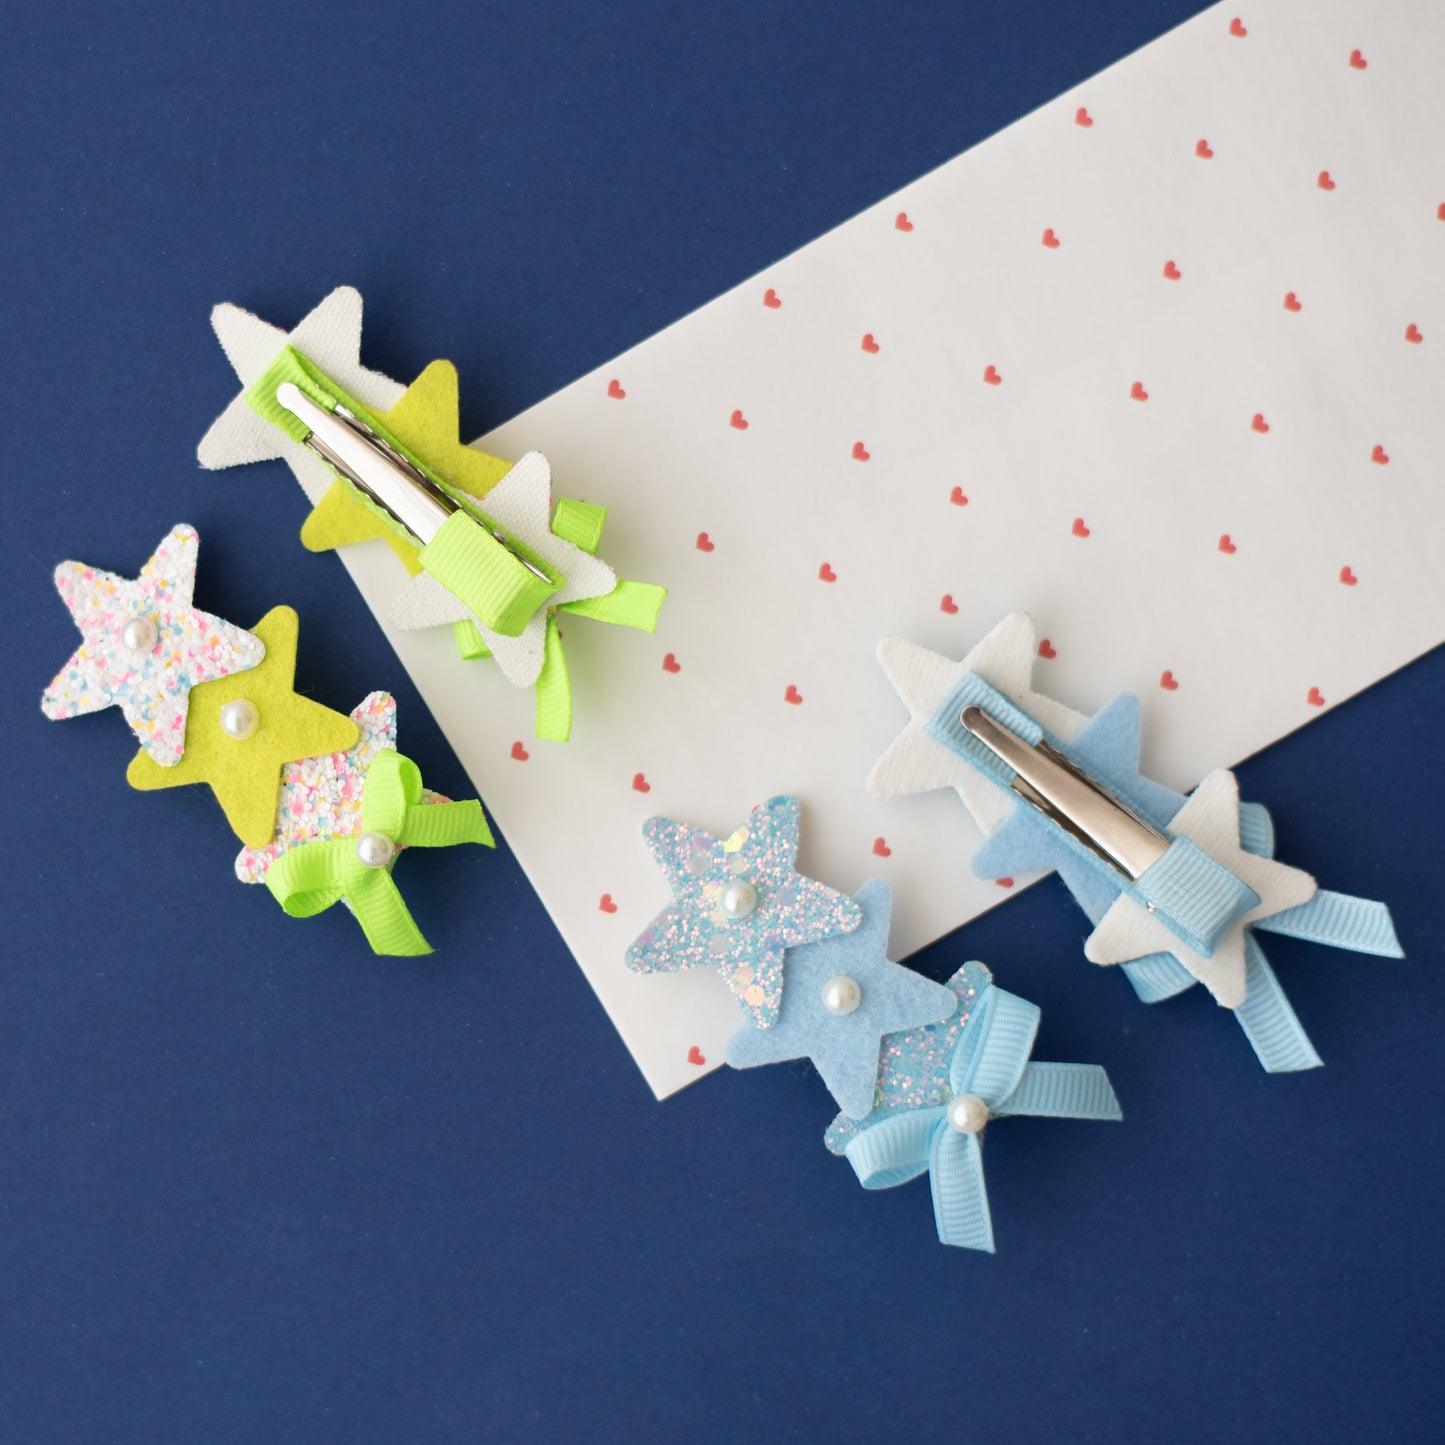 Cute glitter star alligator clips embellished with pearls and small bows  - White, Blue, Fluoroscent Green